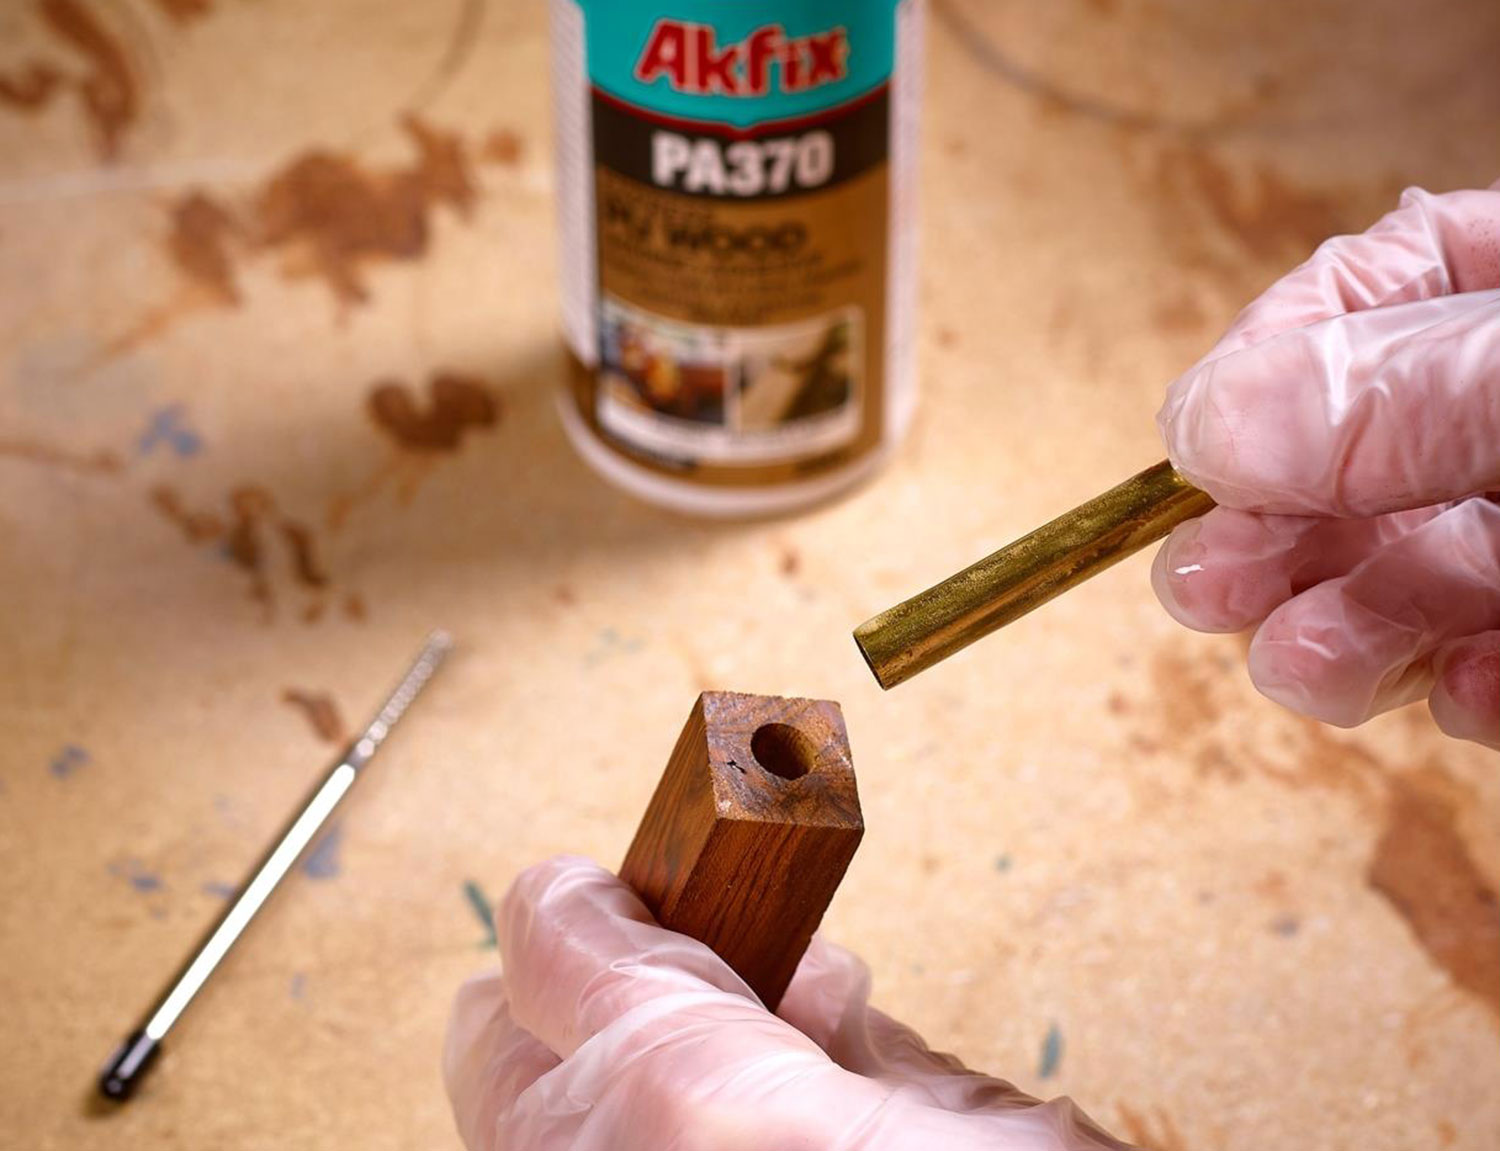 Polyurethane adhesive being applied to a pen blank.